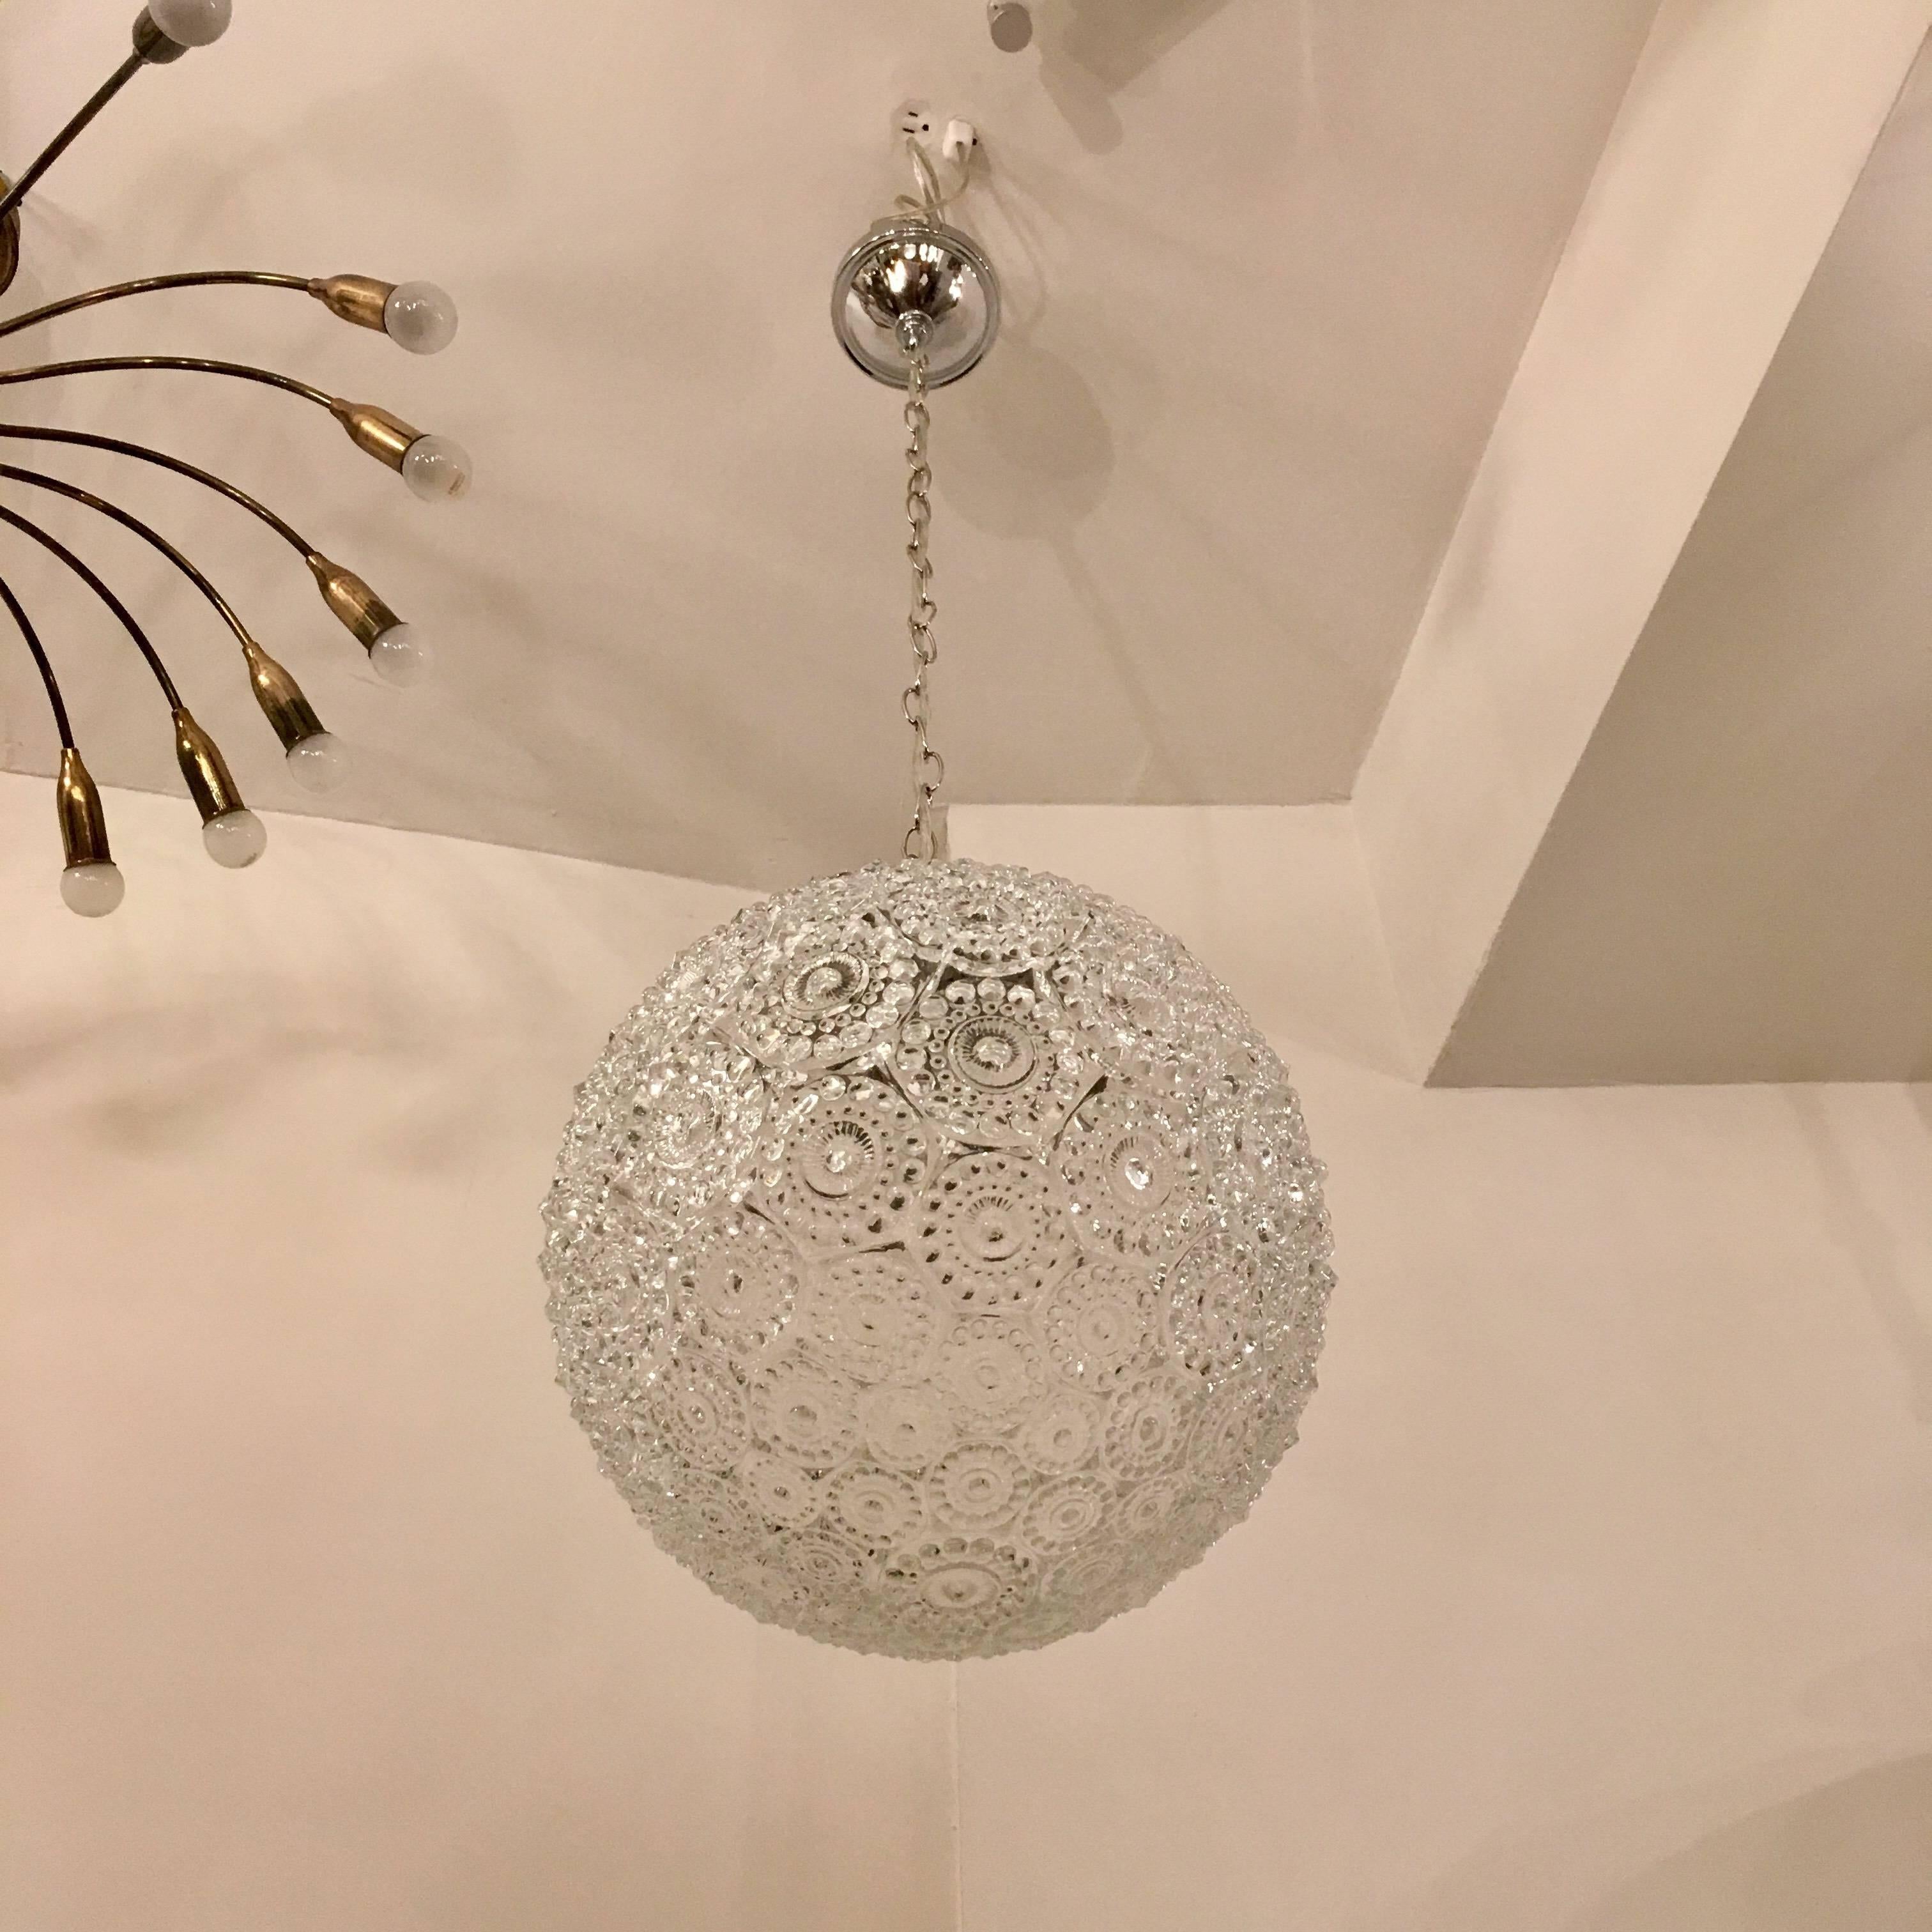 A wonderful 1960s Spage Age decorative glass pendant with a polished chrome holder and chain. Newly rewired.